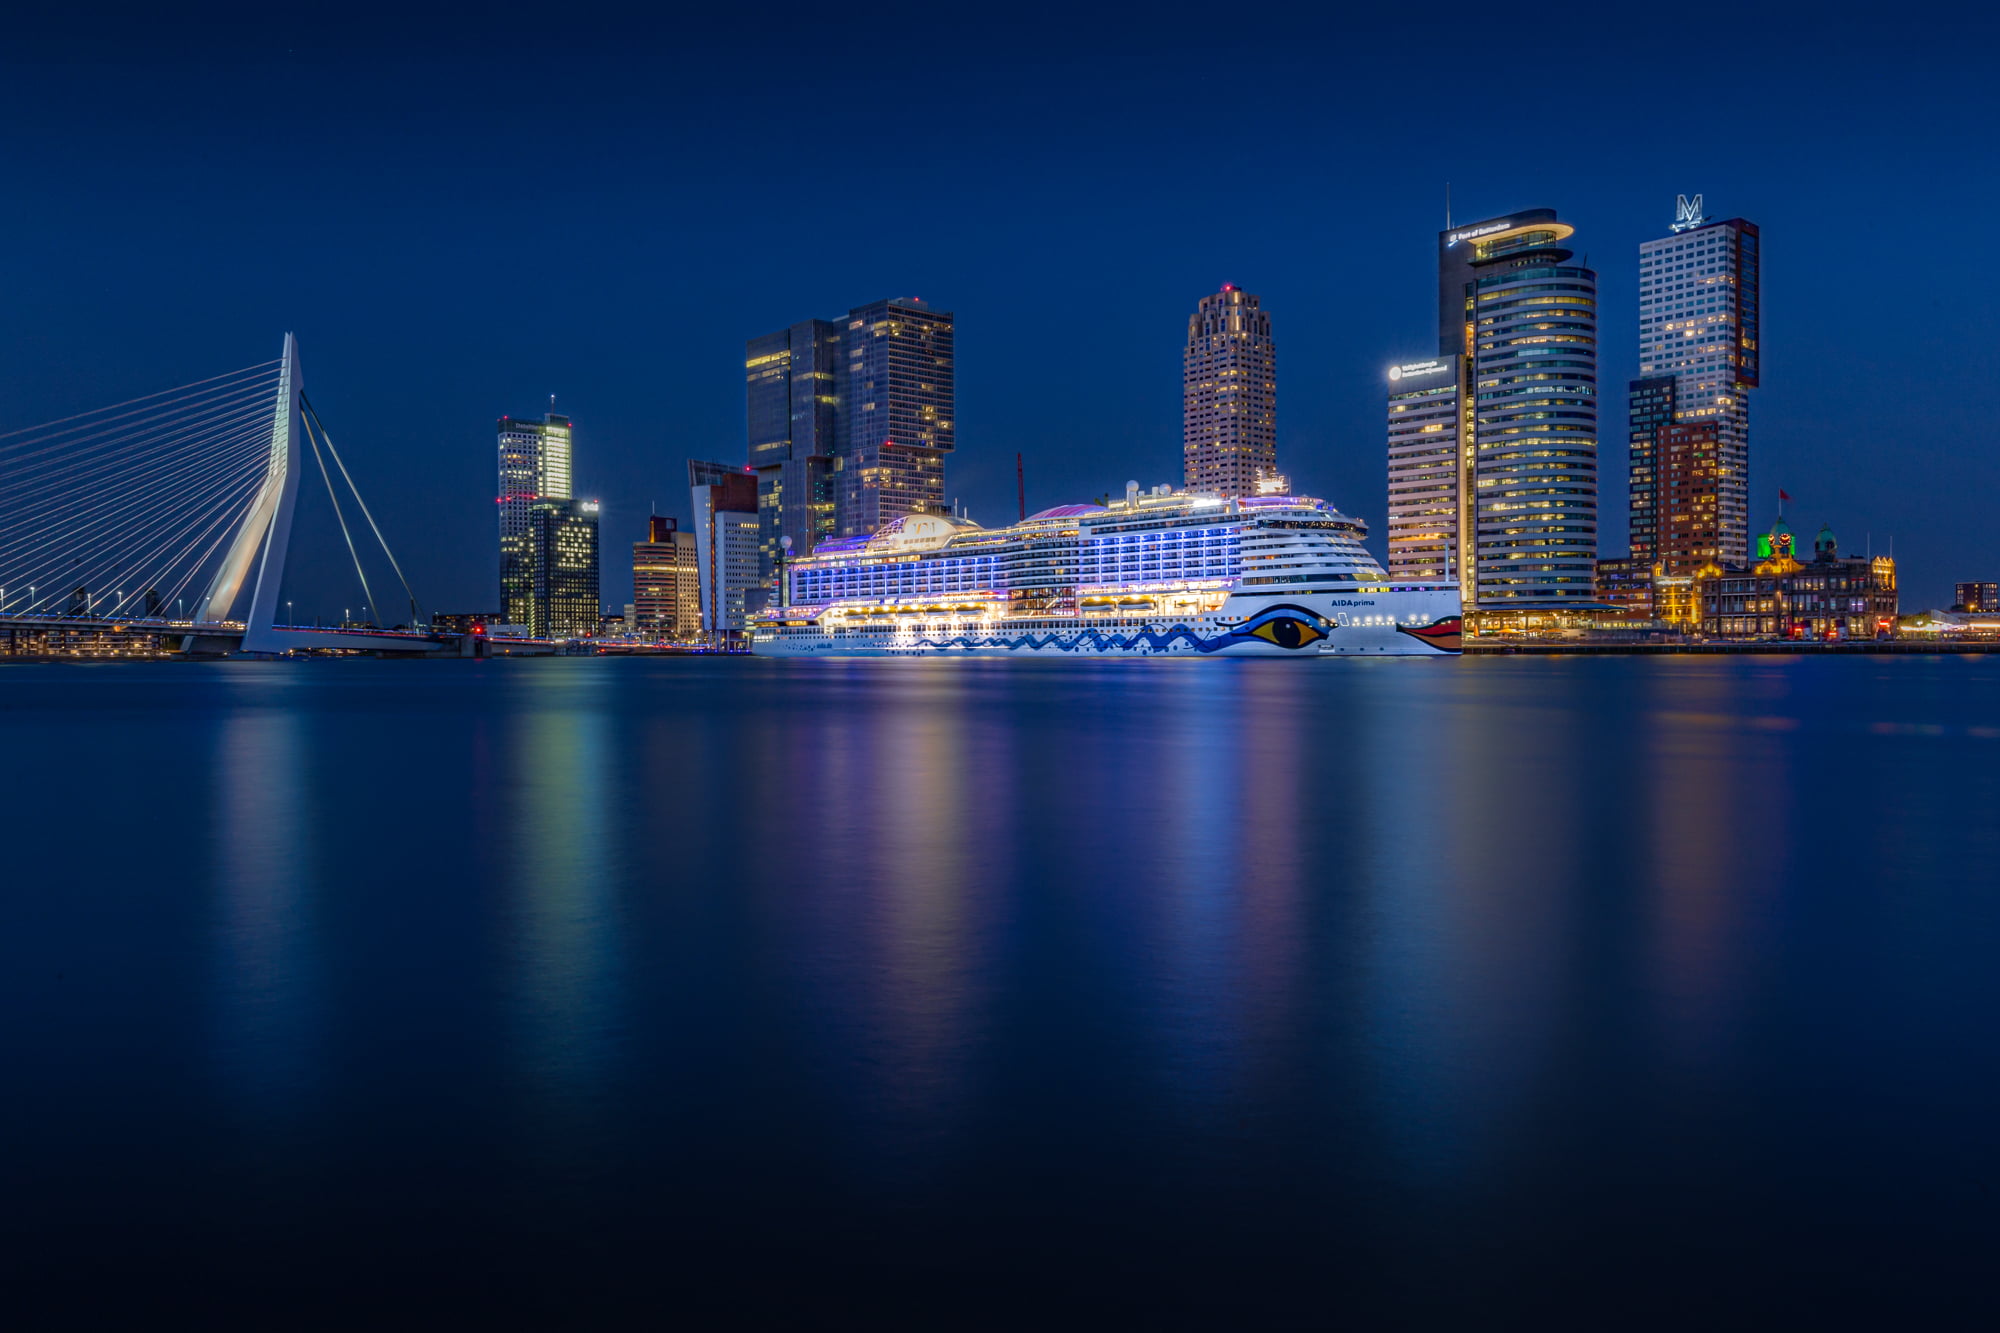 Luxury Cruise near city structures during night time, Aida, Rotterdam